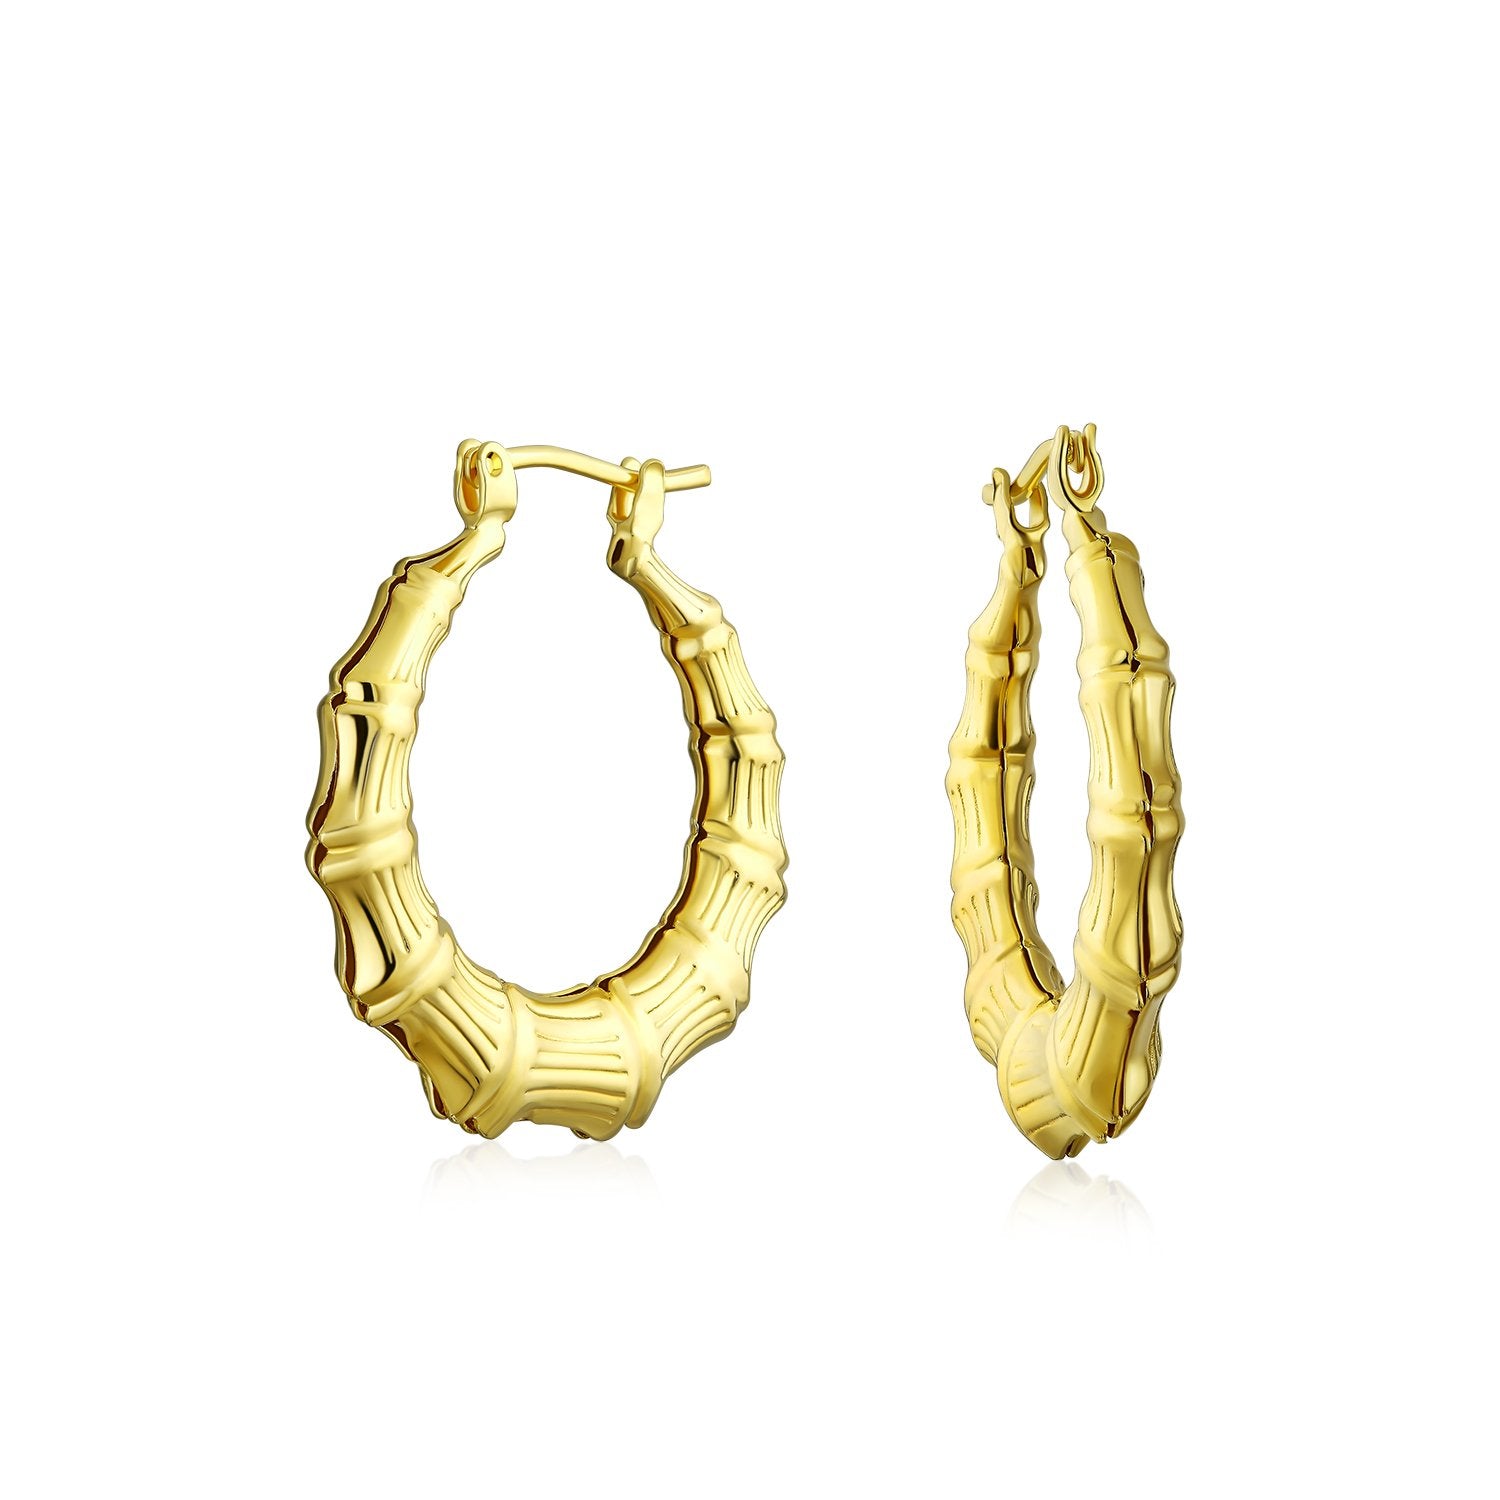 Light Weight Big Bamboo Hoop Earrings Gold Plated 3 Sizes - Joyeria Lady